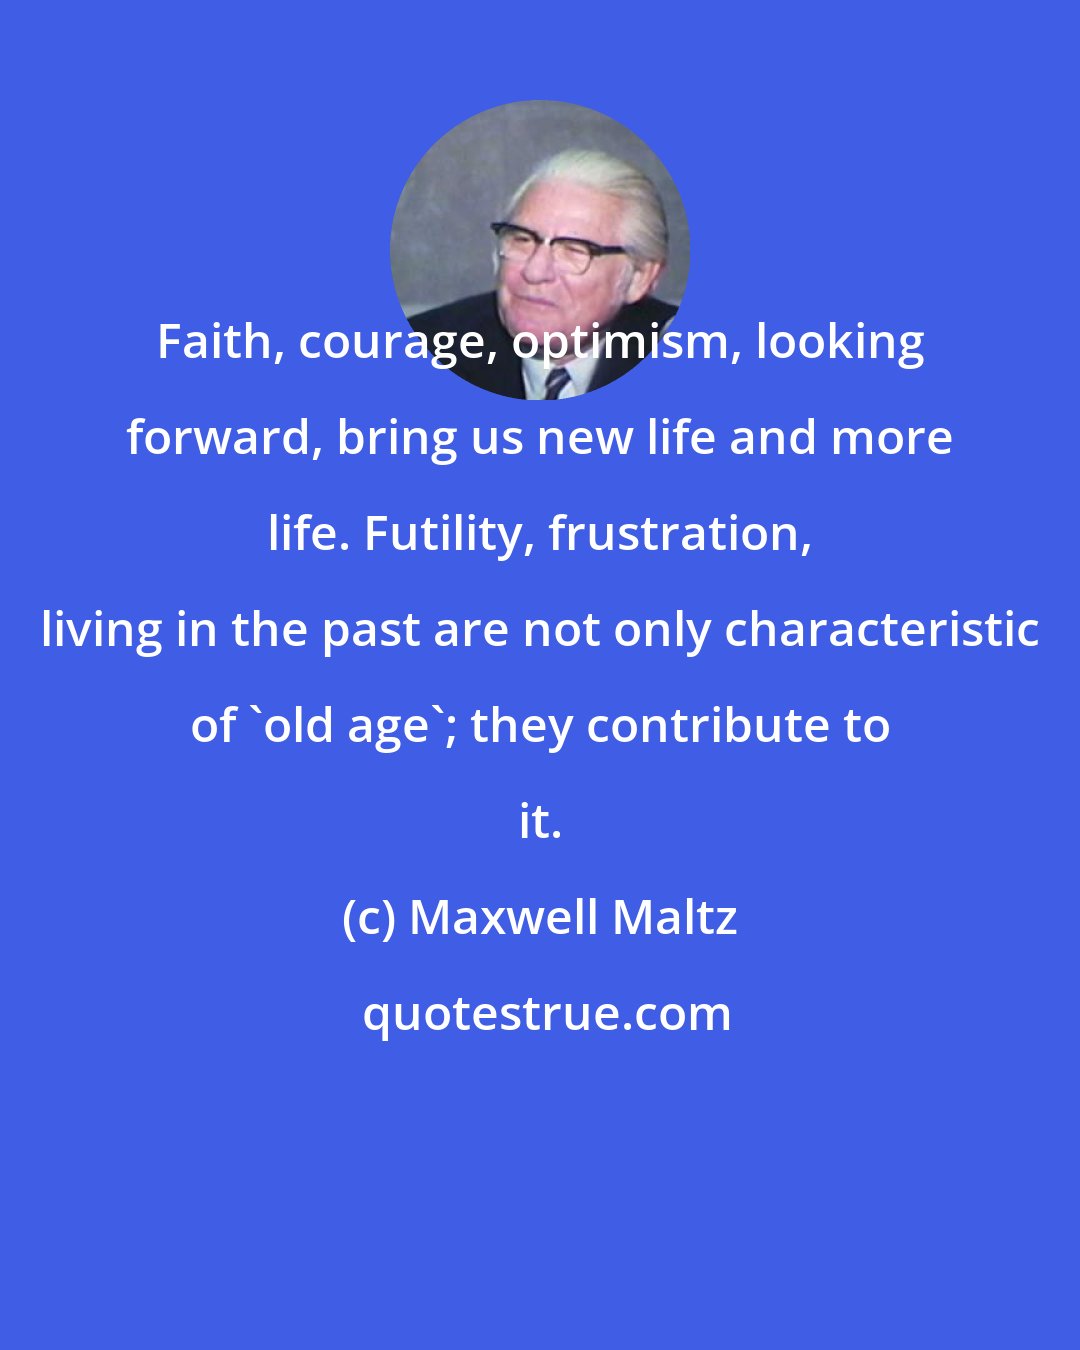 Maxwell Maltz: Faith, courage, optimism, looking forward, bring us new life and more life. Futility, frustration, living in the past are not only characteristic of 'old age'; they contribute to it.